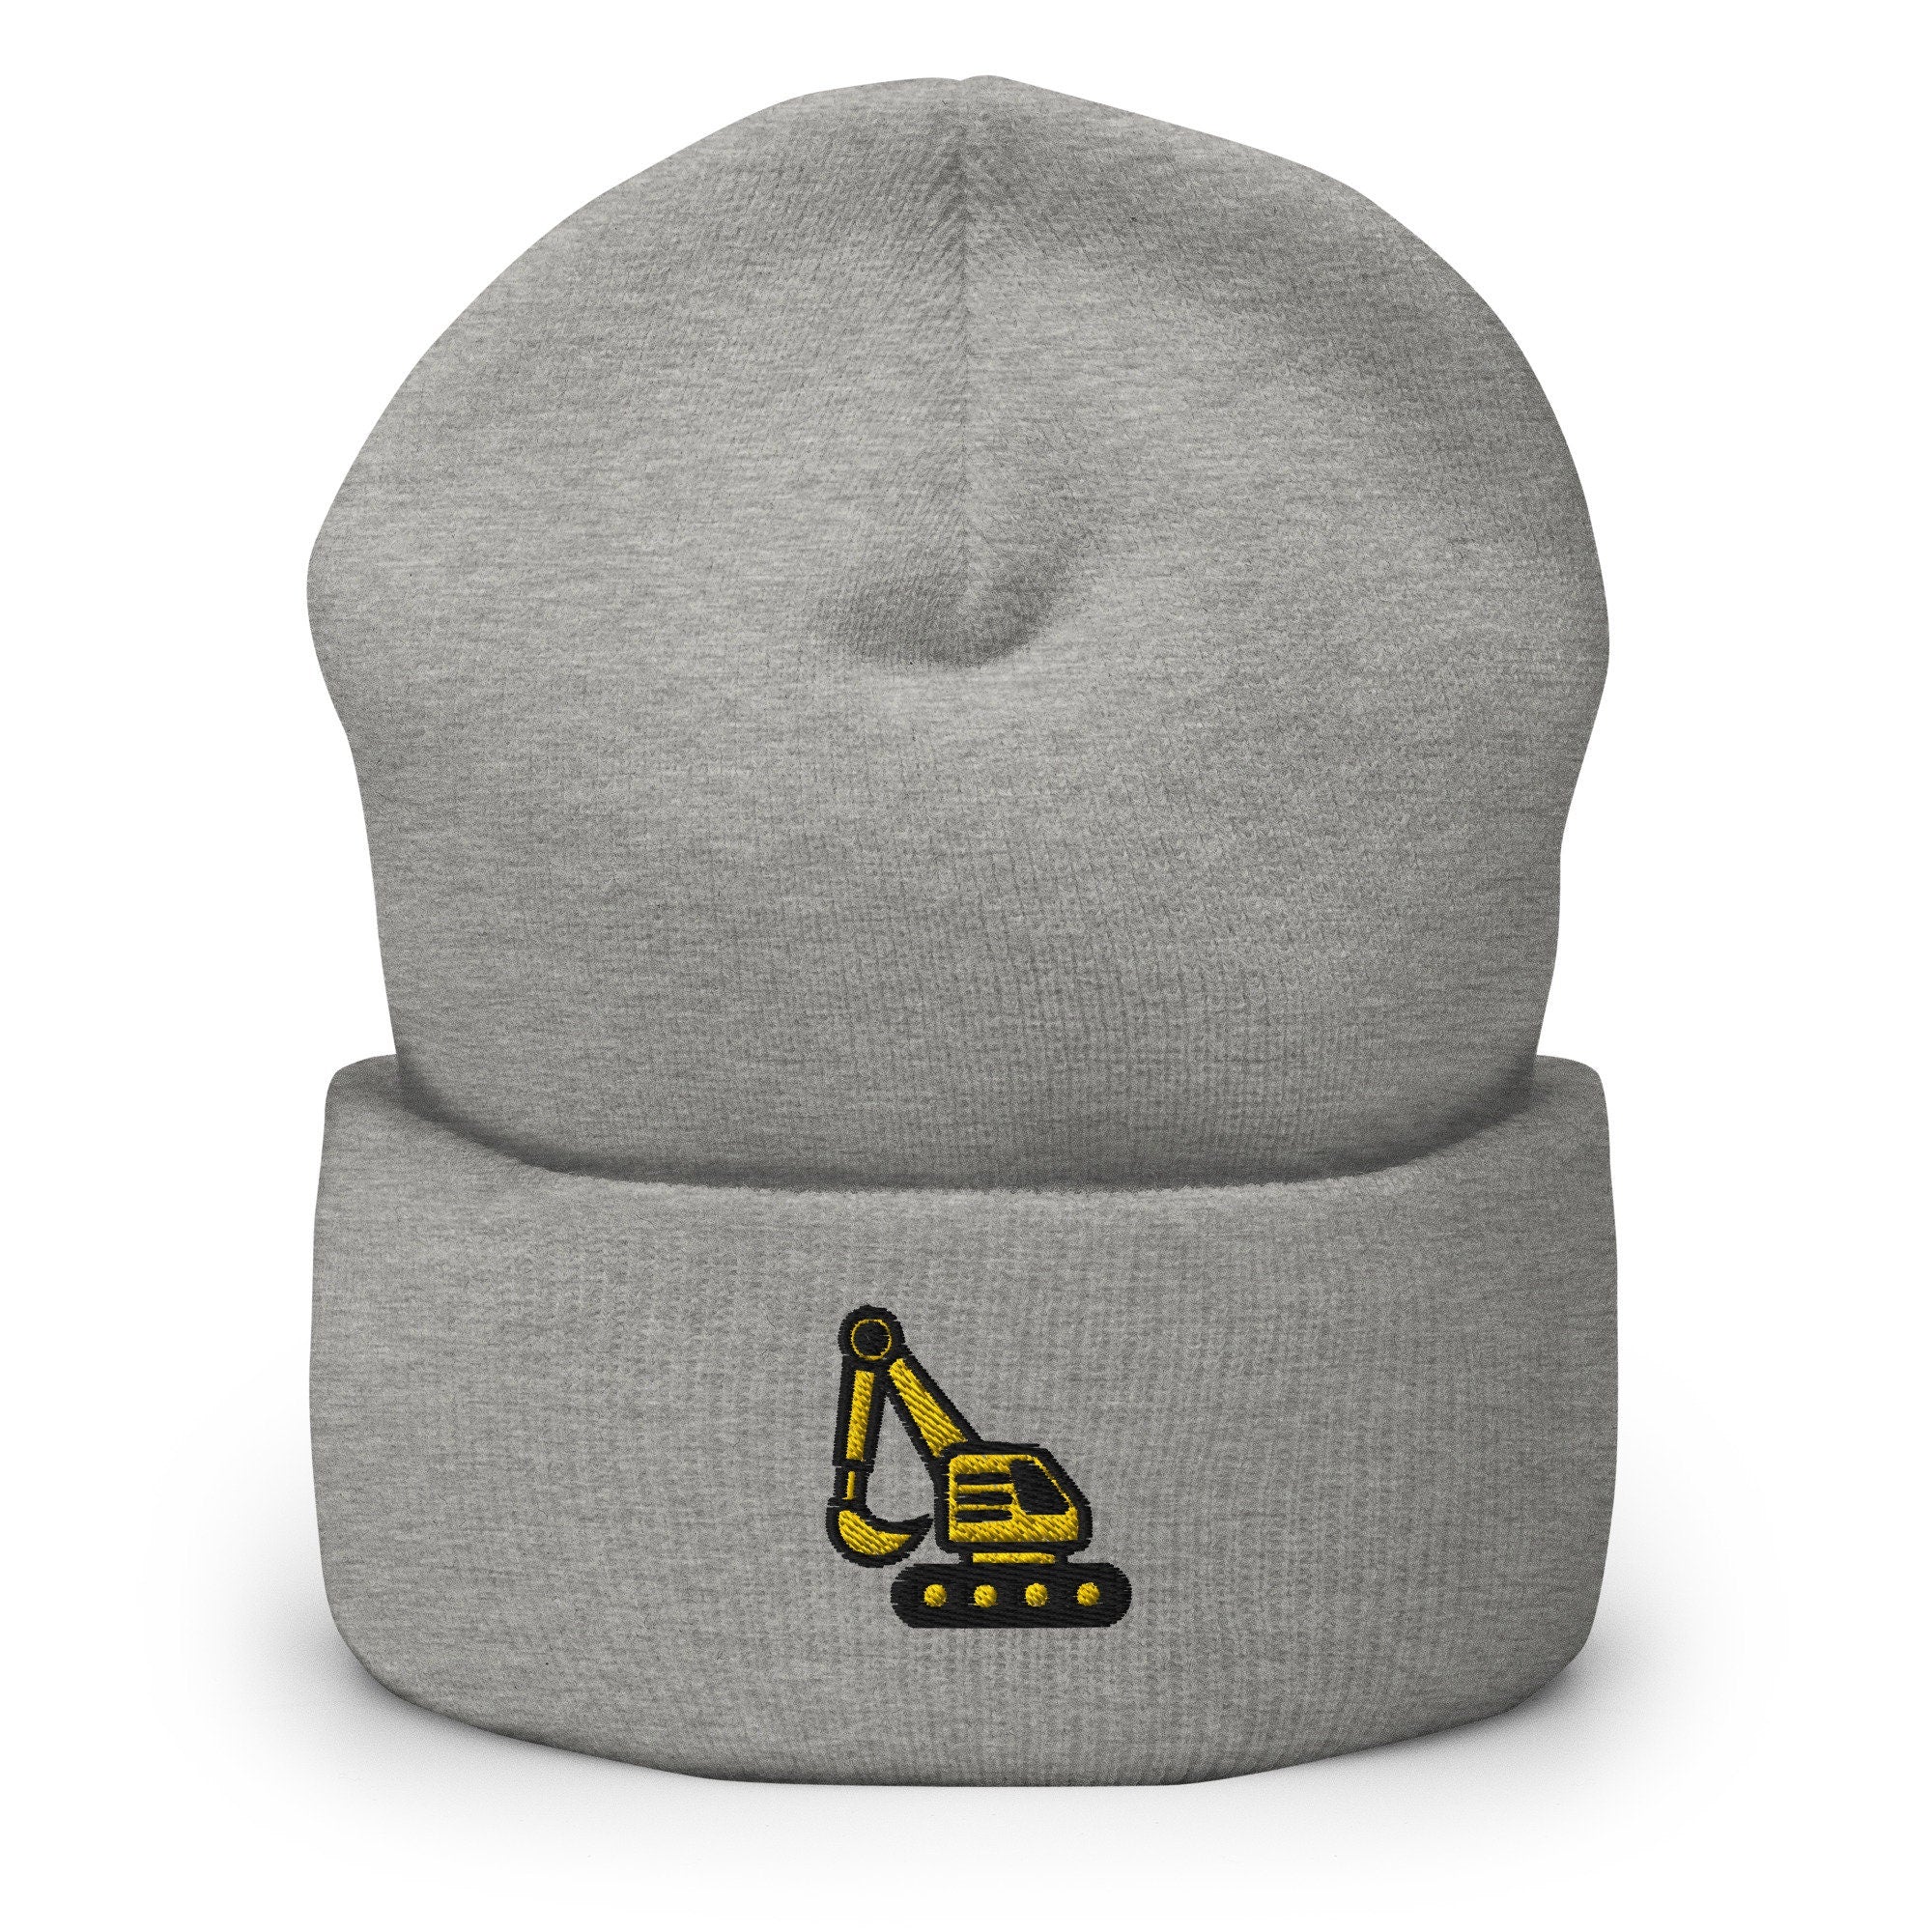 Construction Digger Excavator Embroidered Beanie, Handmade Cuffed Knit Unisex Slouchy Adult Winter Hat Cap Gift